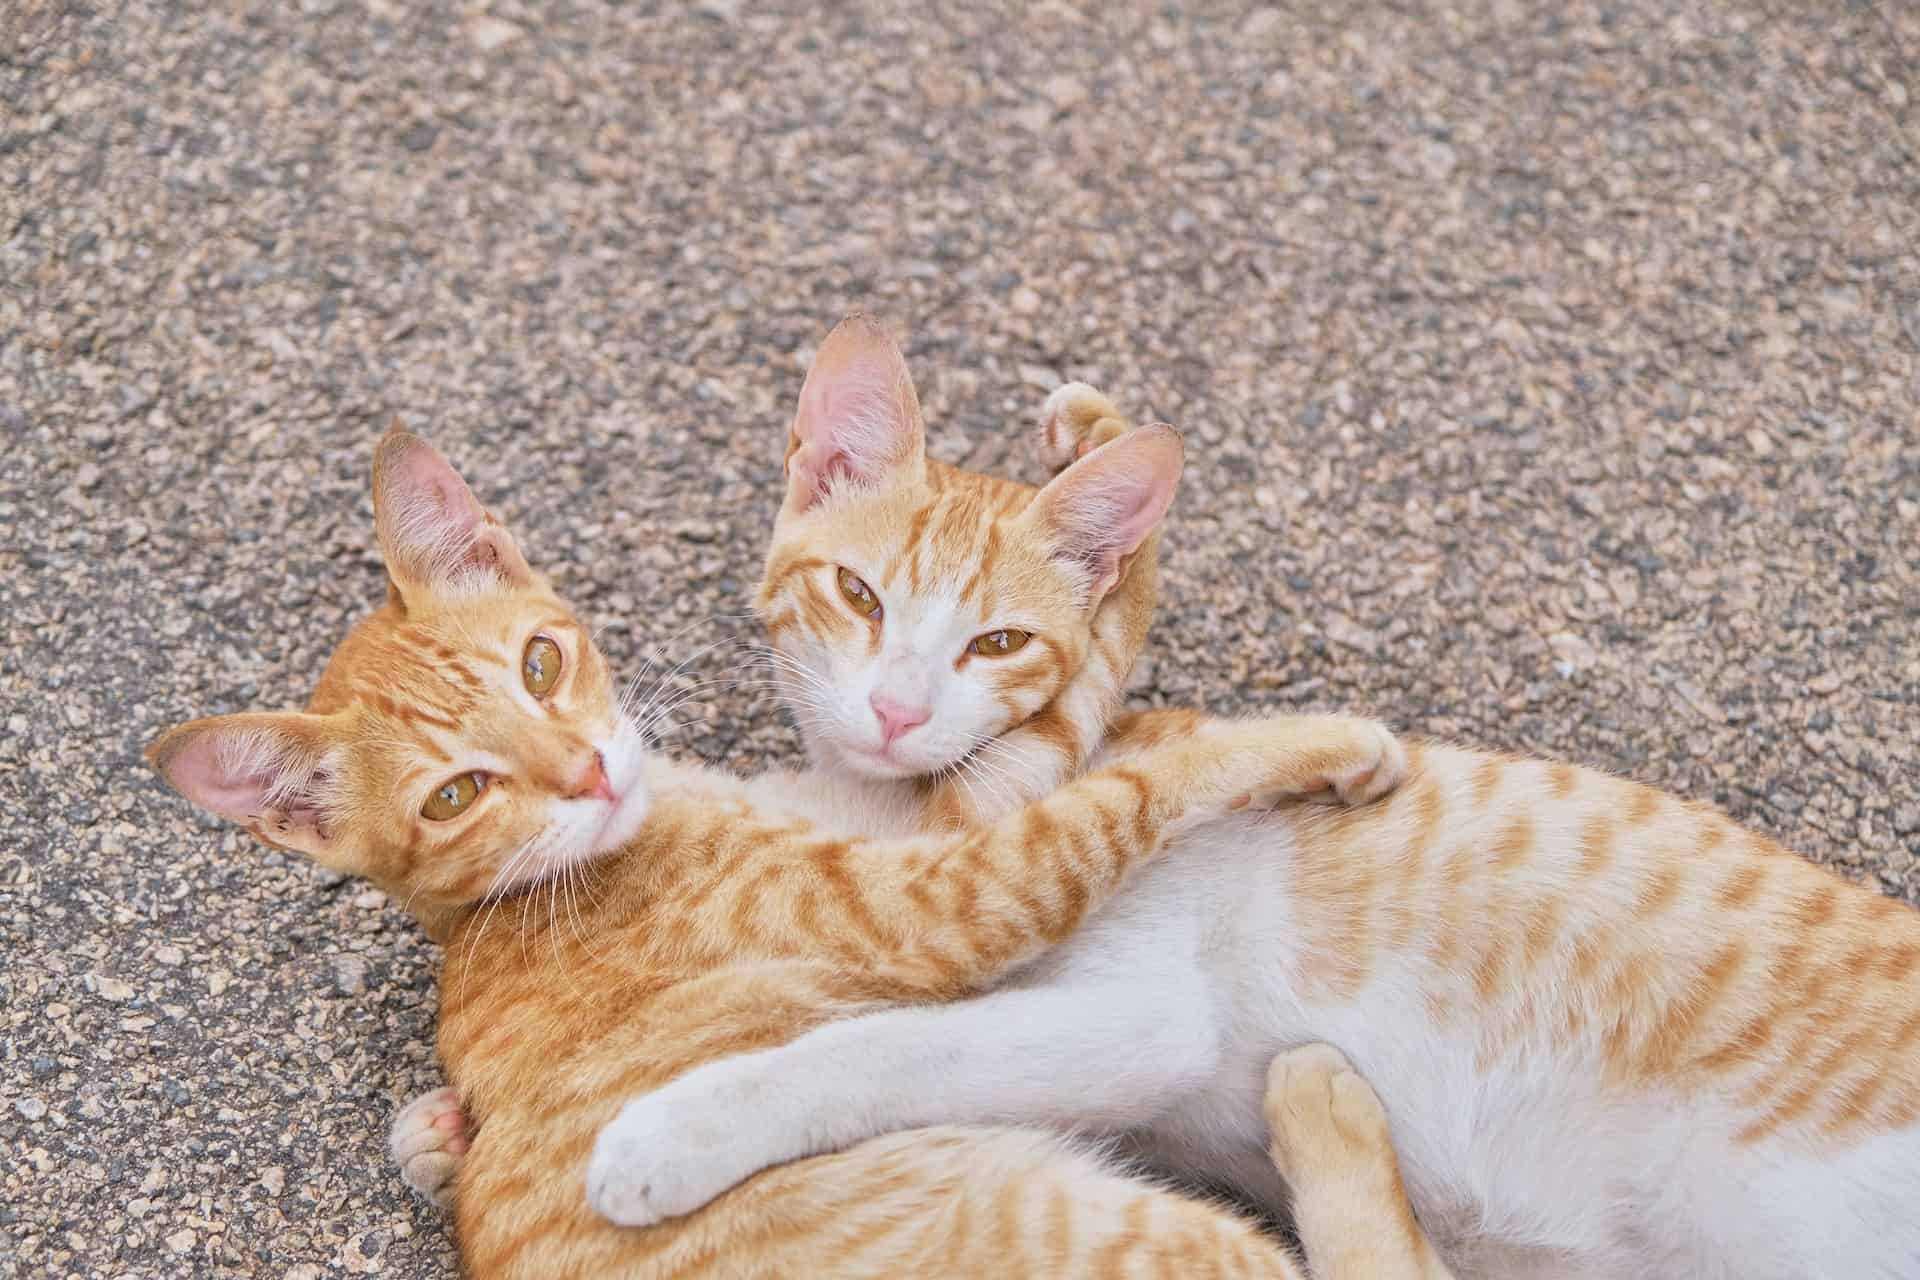 Two cats holding each other in their arms.